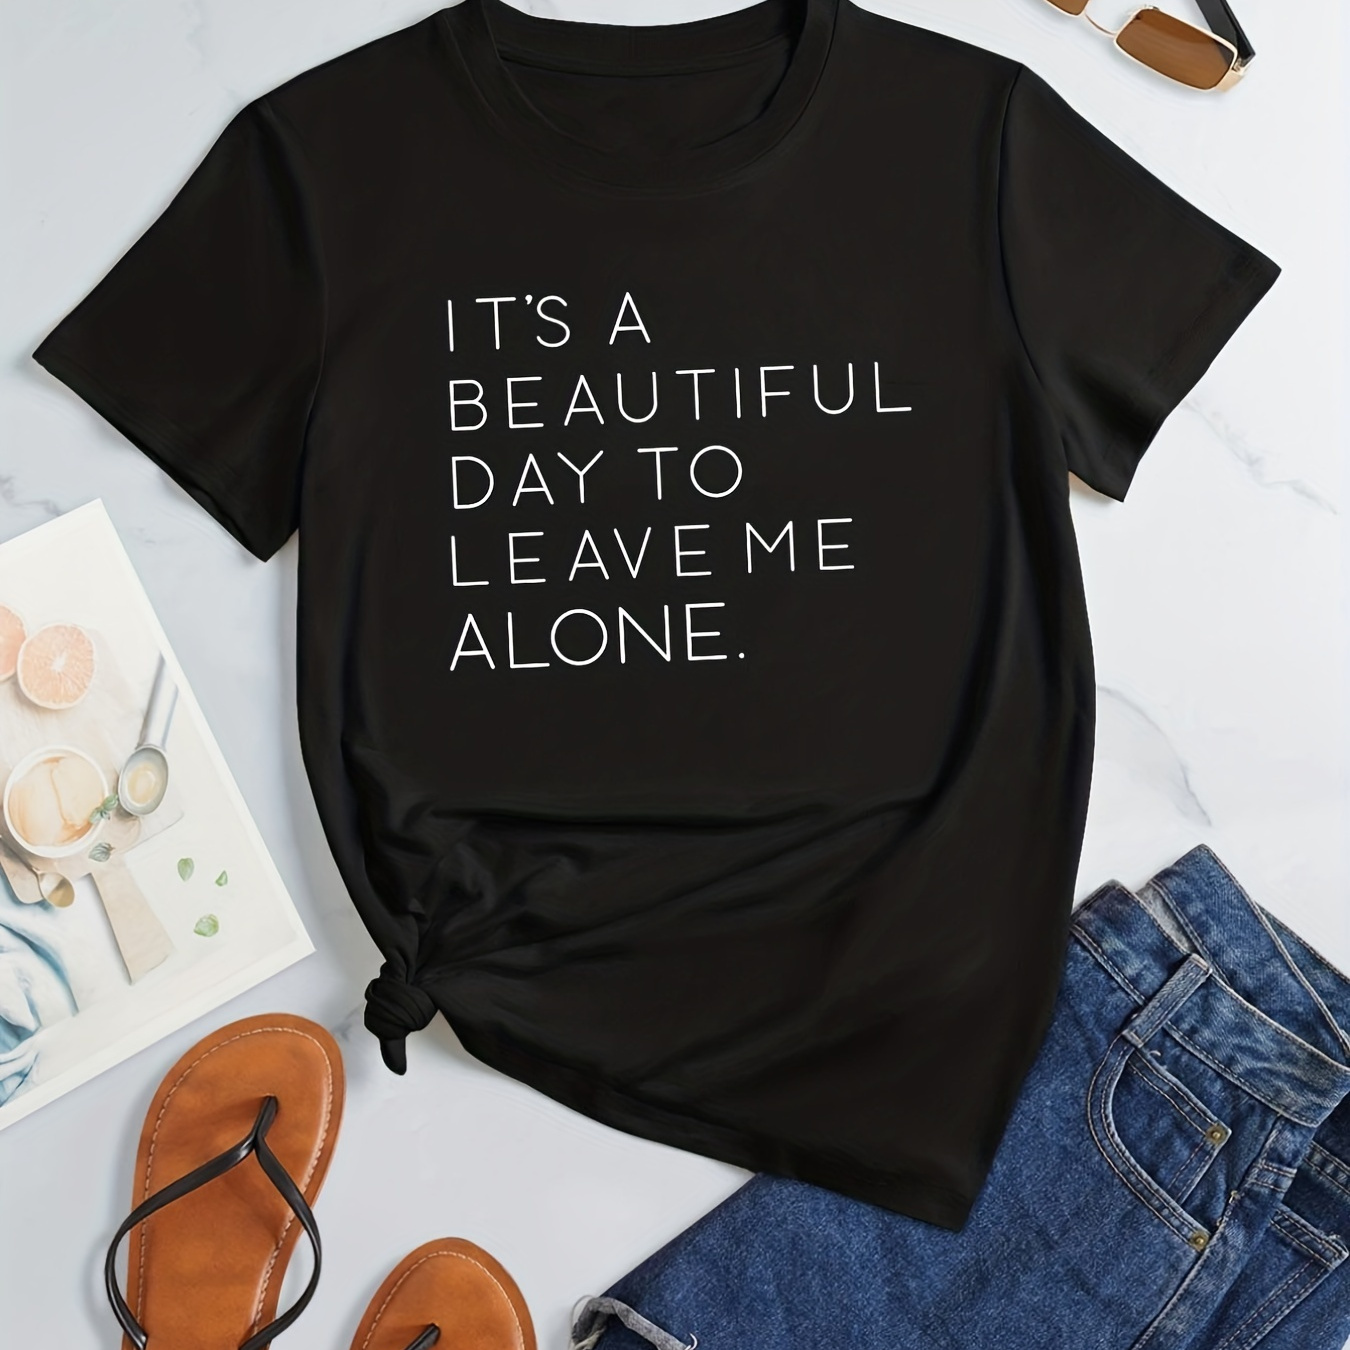 

Casual Leave Me Alone Print Crew Neck T-shirt, Loose Short Sleeve Fashion Summer T-shirts Tops, Women's Clothing